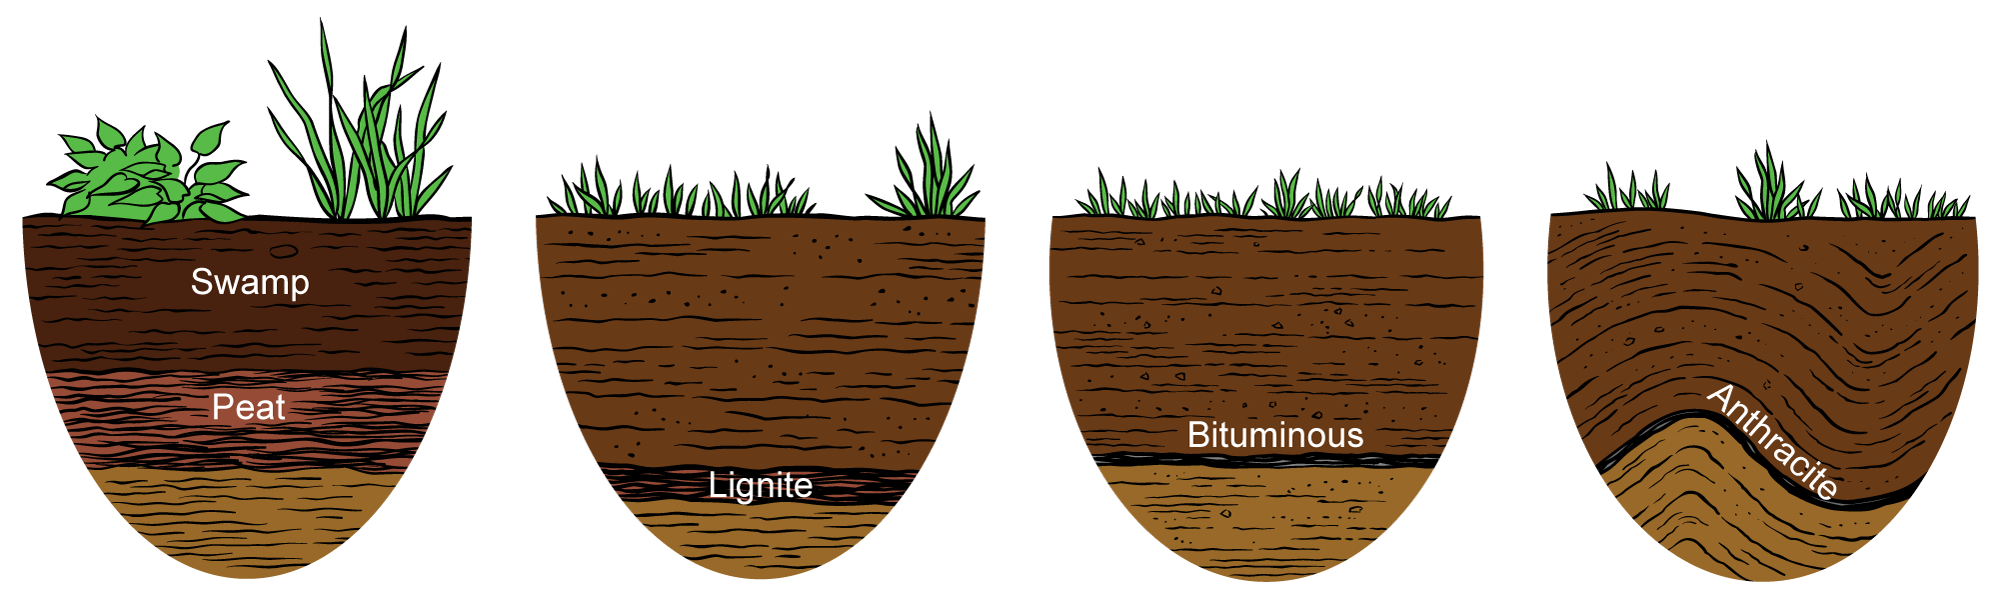 Diagrams showing stages in the formation of coal. From left to right: Peat, lignite, bitmuminous, and anthracite.